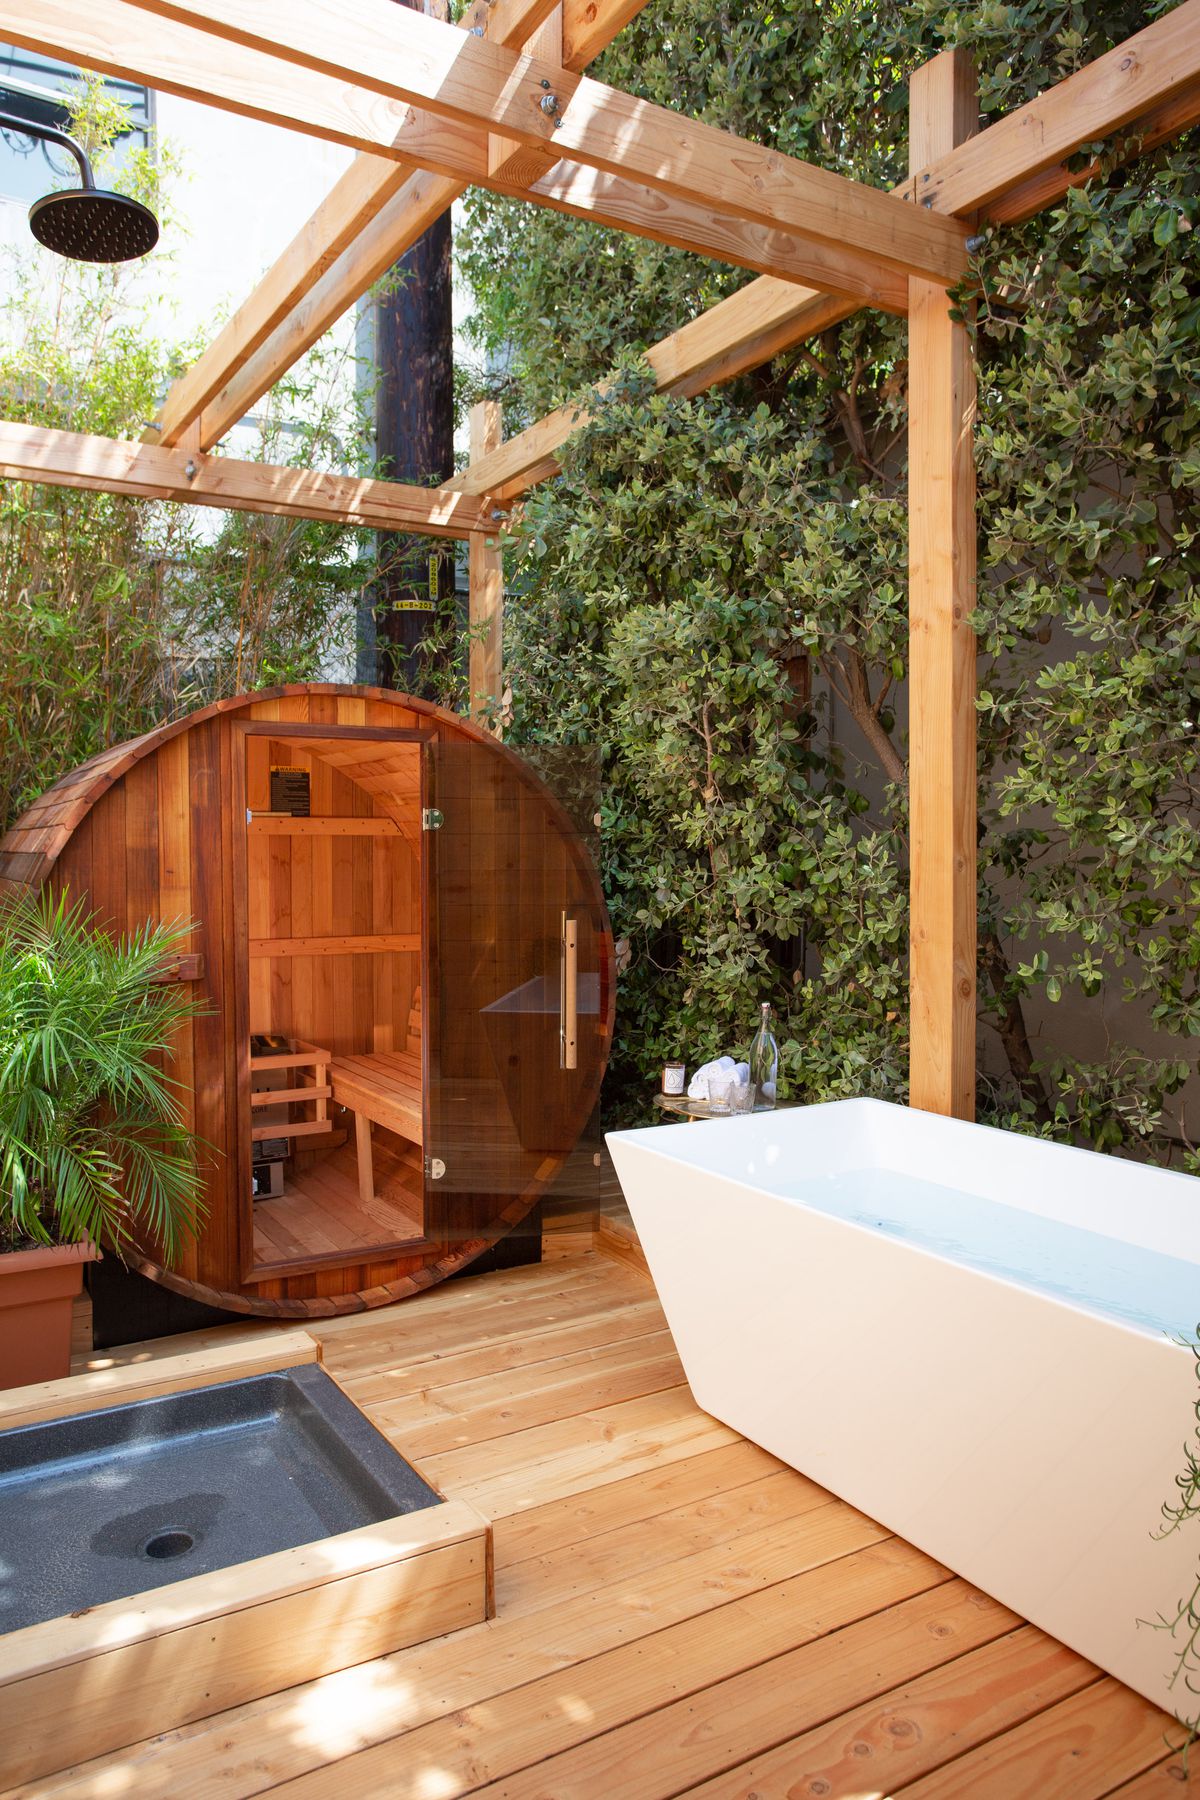 A photo of a shower and a sauna.